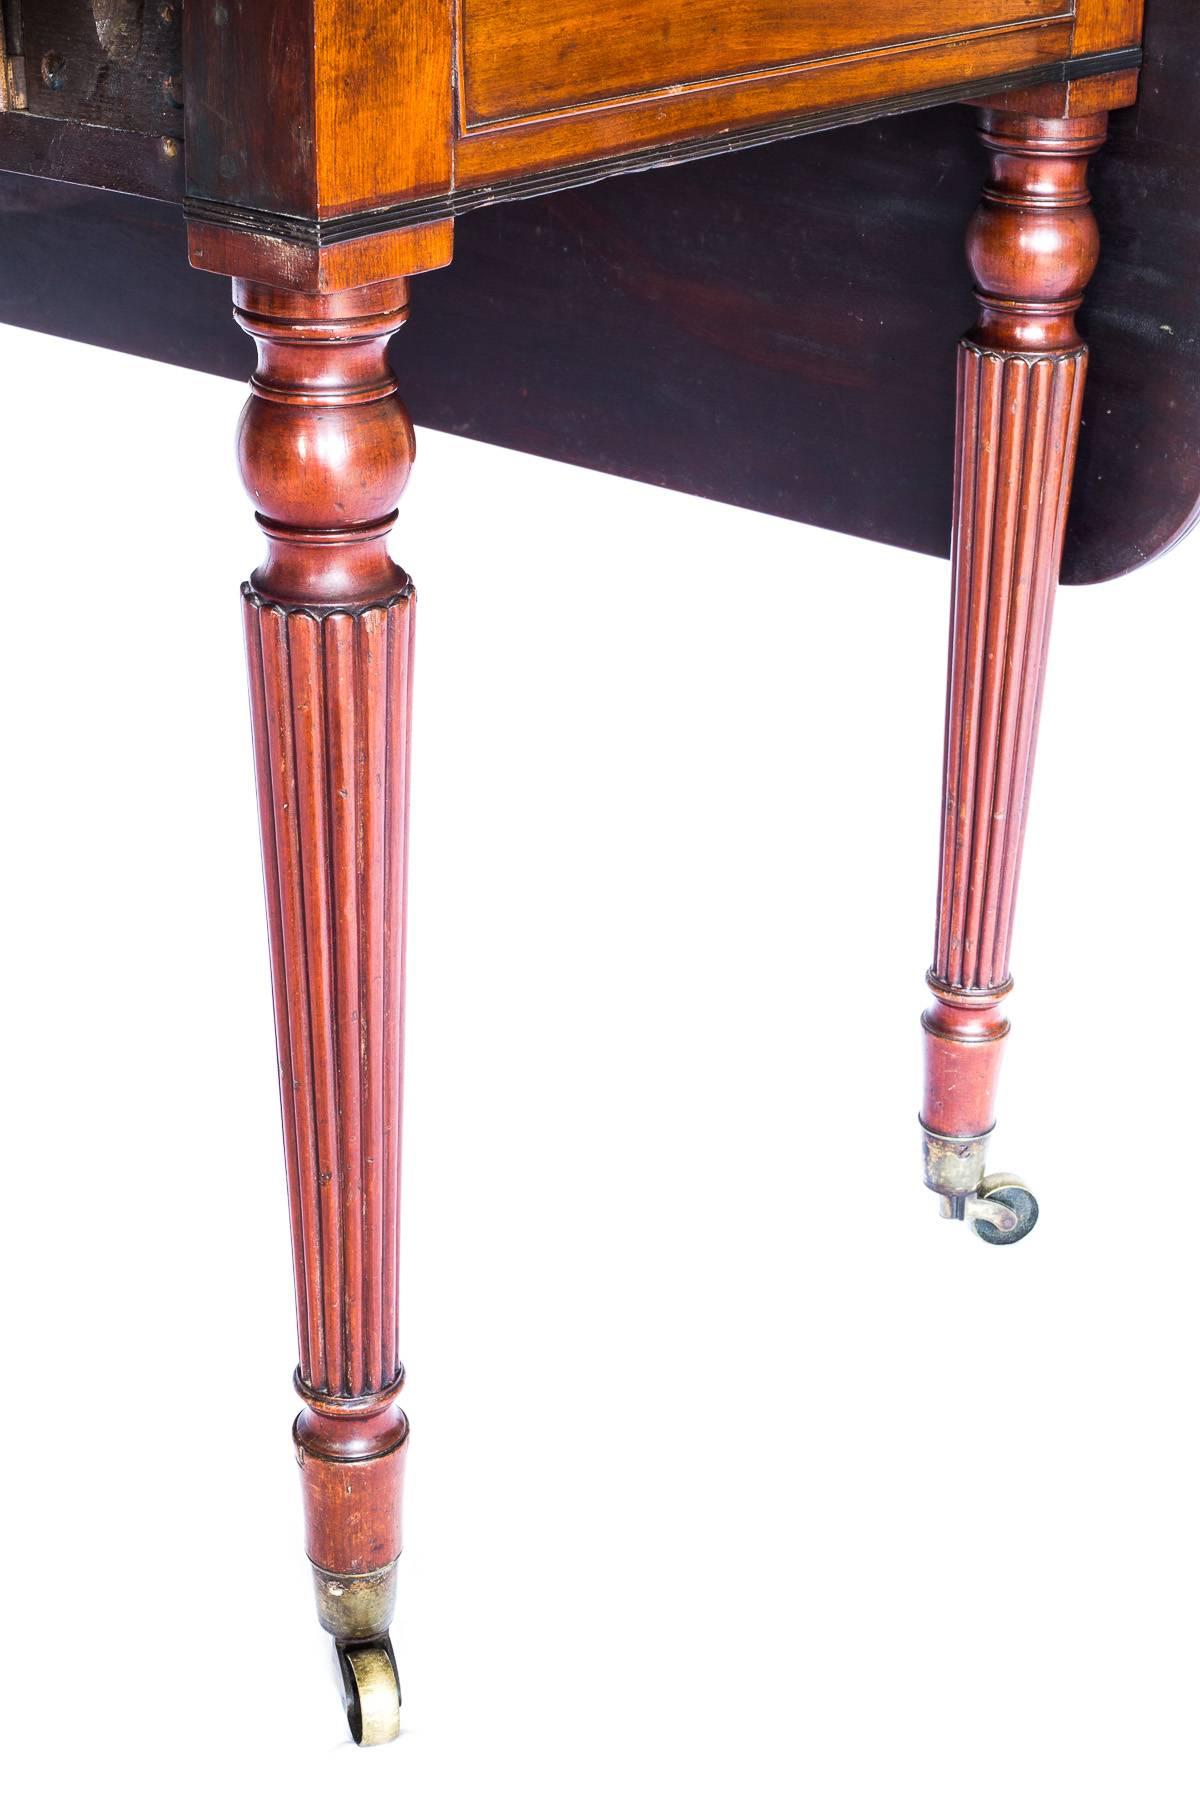 Carved Regency Mahogany and Rosewood Pembroke / Drop-Leaf Table of Gillows Style